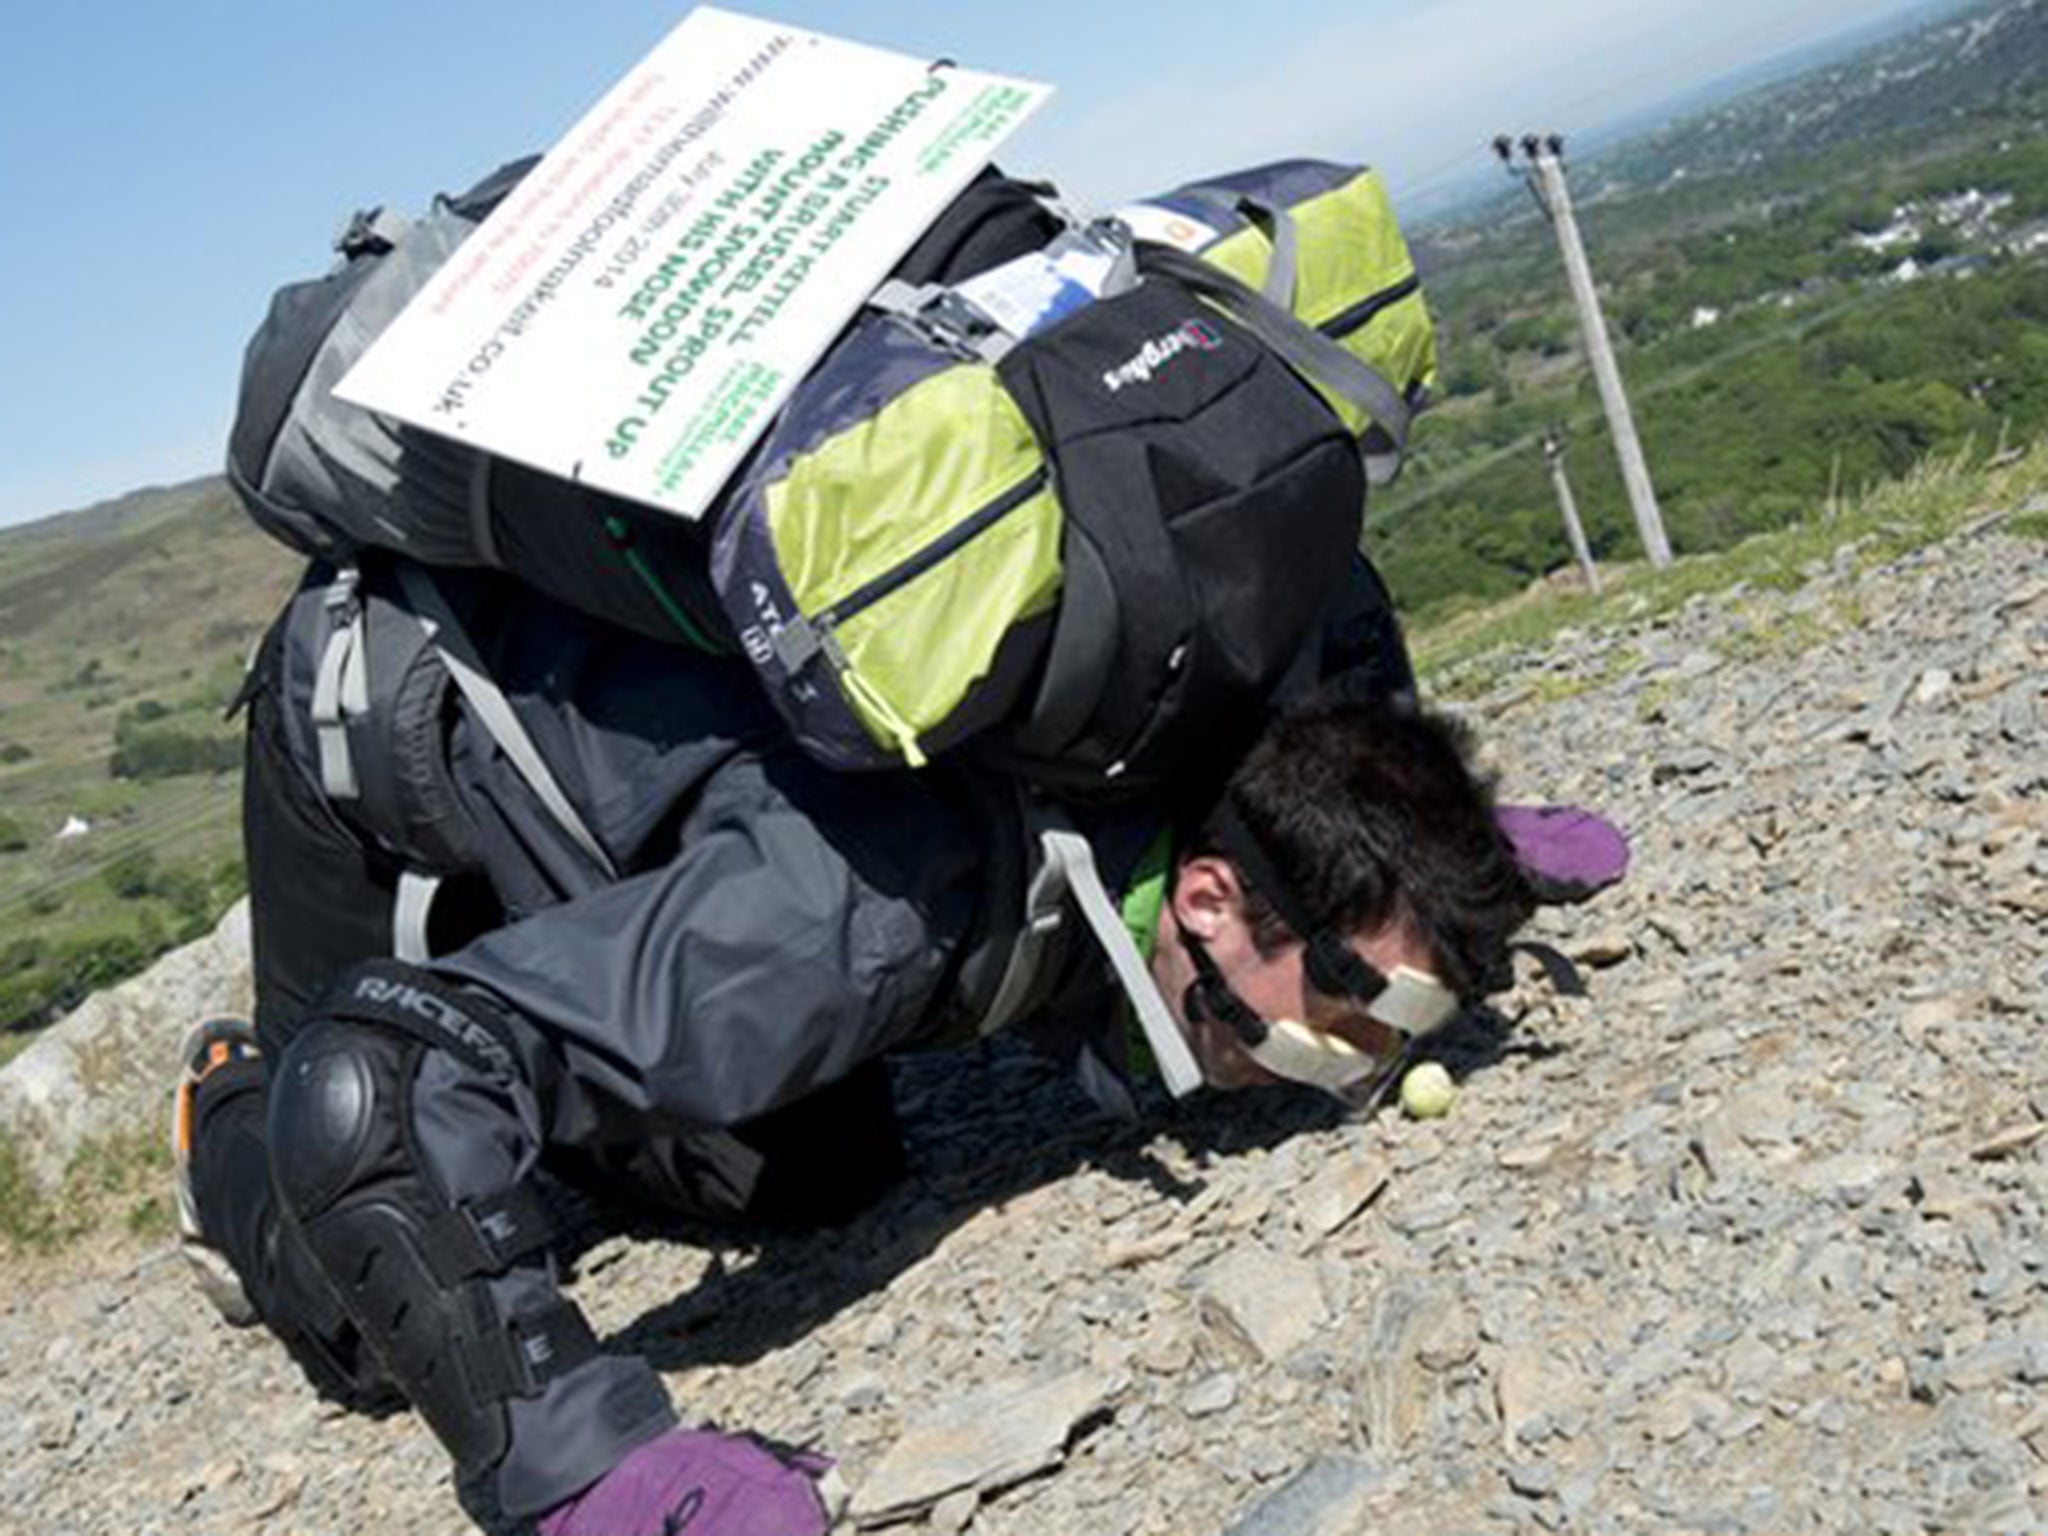 The climb took four days and is thought to have raised £5,000 for MacMillan